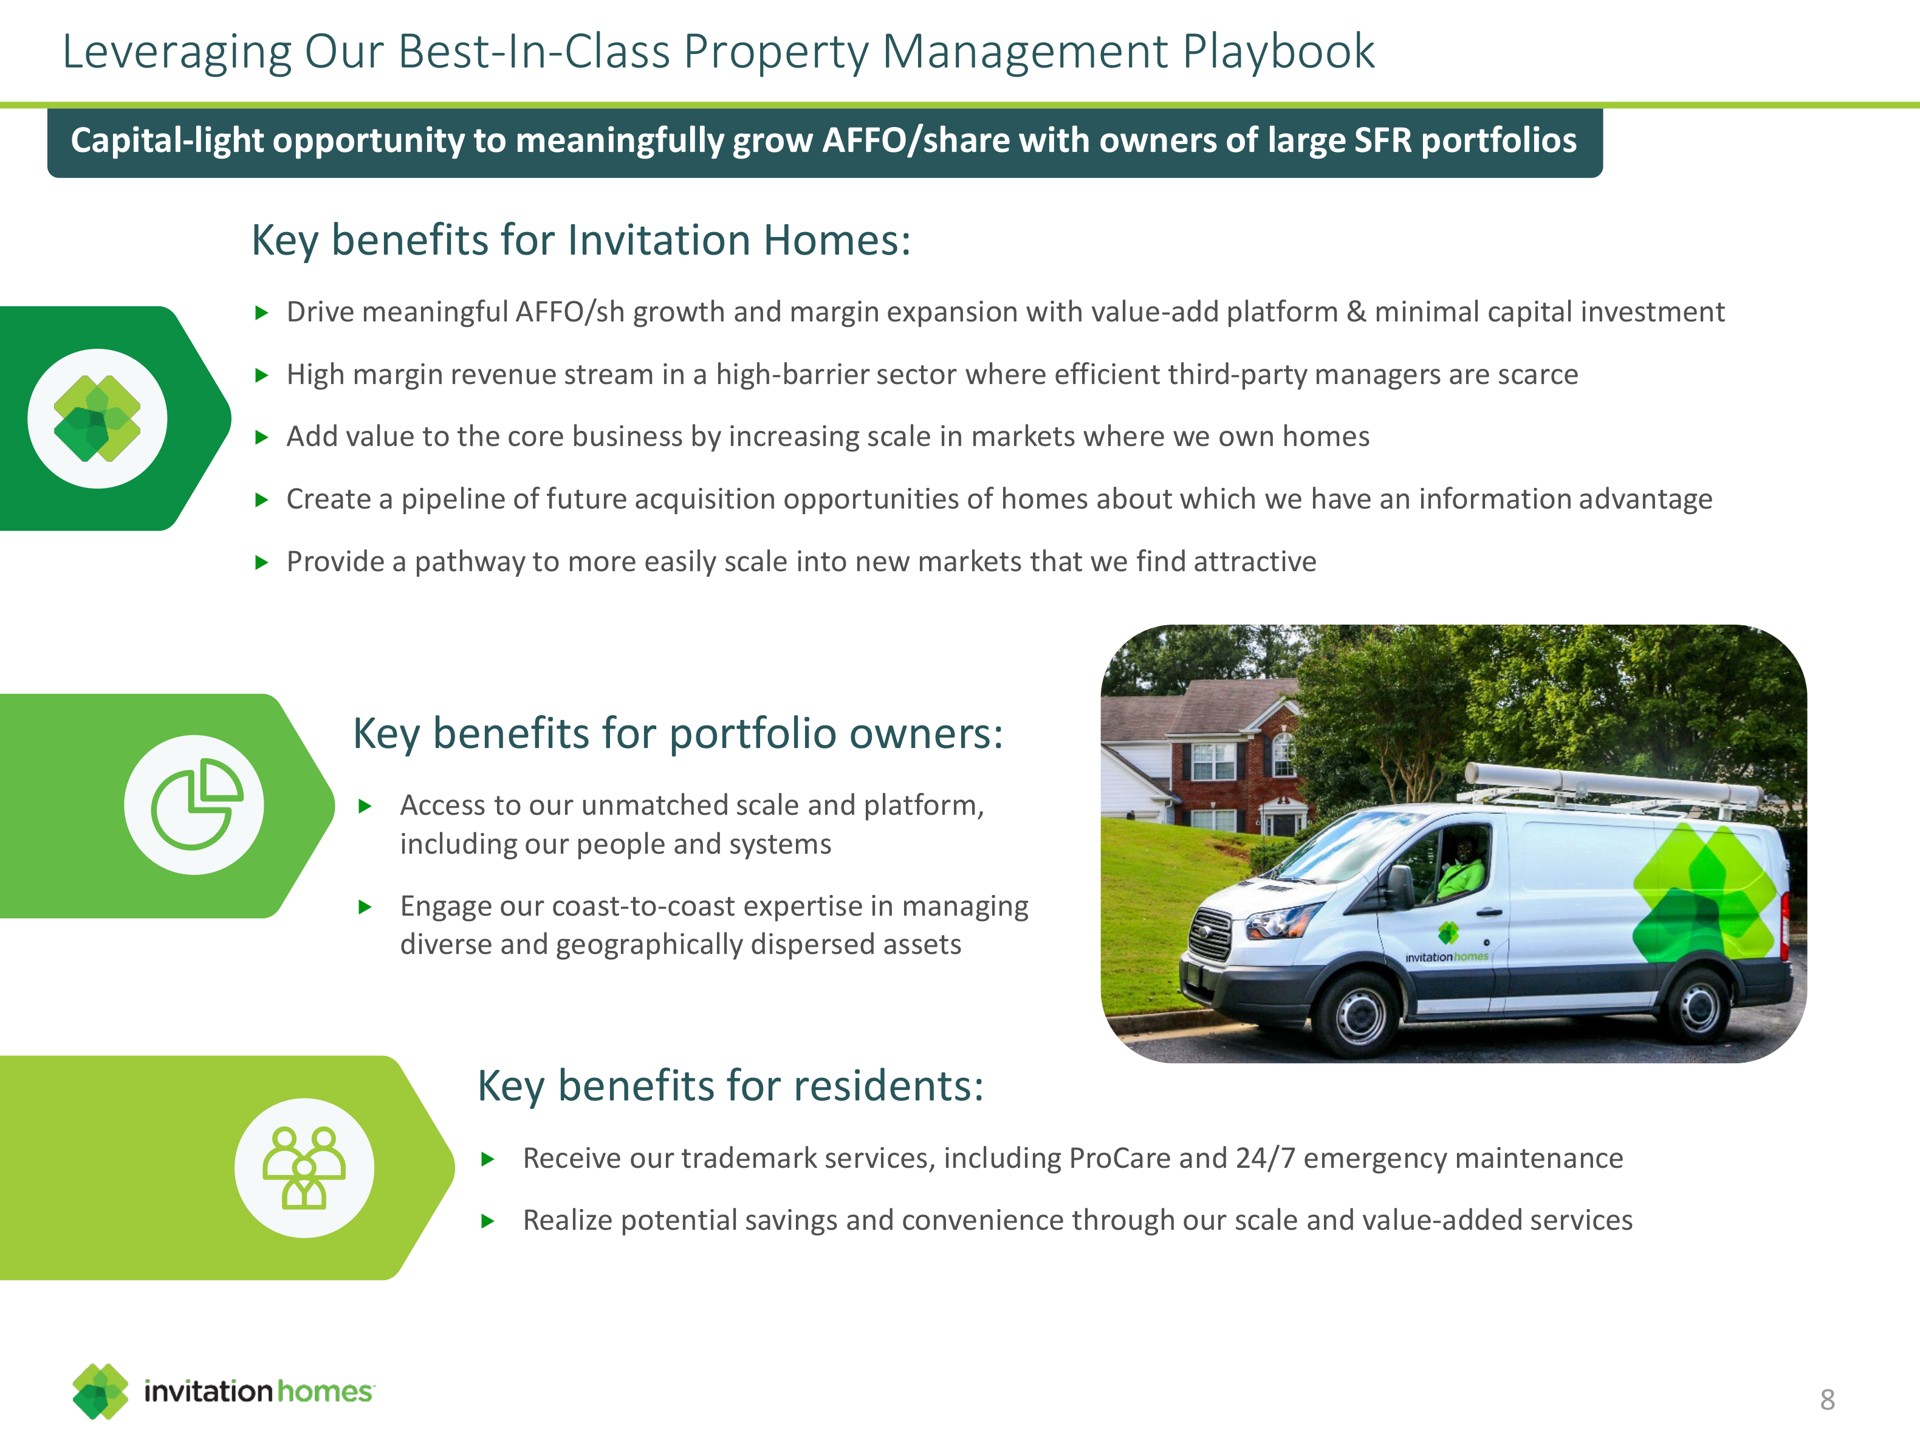 leveraging our best in class property management playbook capital light opportunity to meaningfully grow share with owners of large portfolios key benefits for invitation homes key benefits for portfolio owners key benefits for residents | Invitation Homes